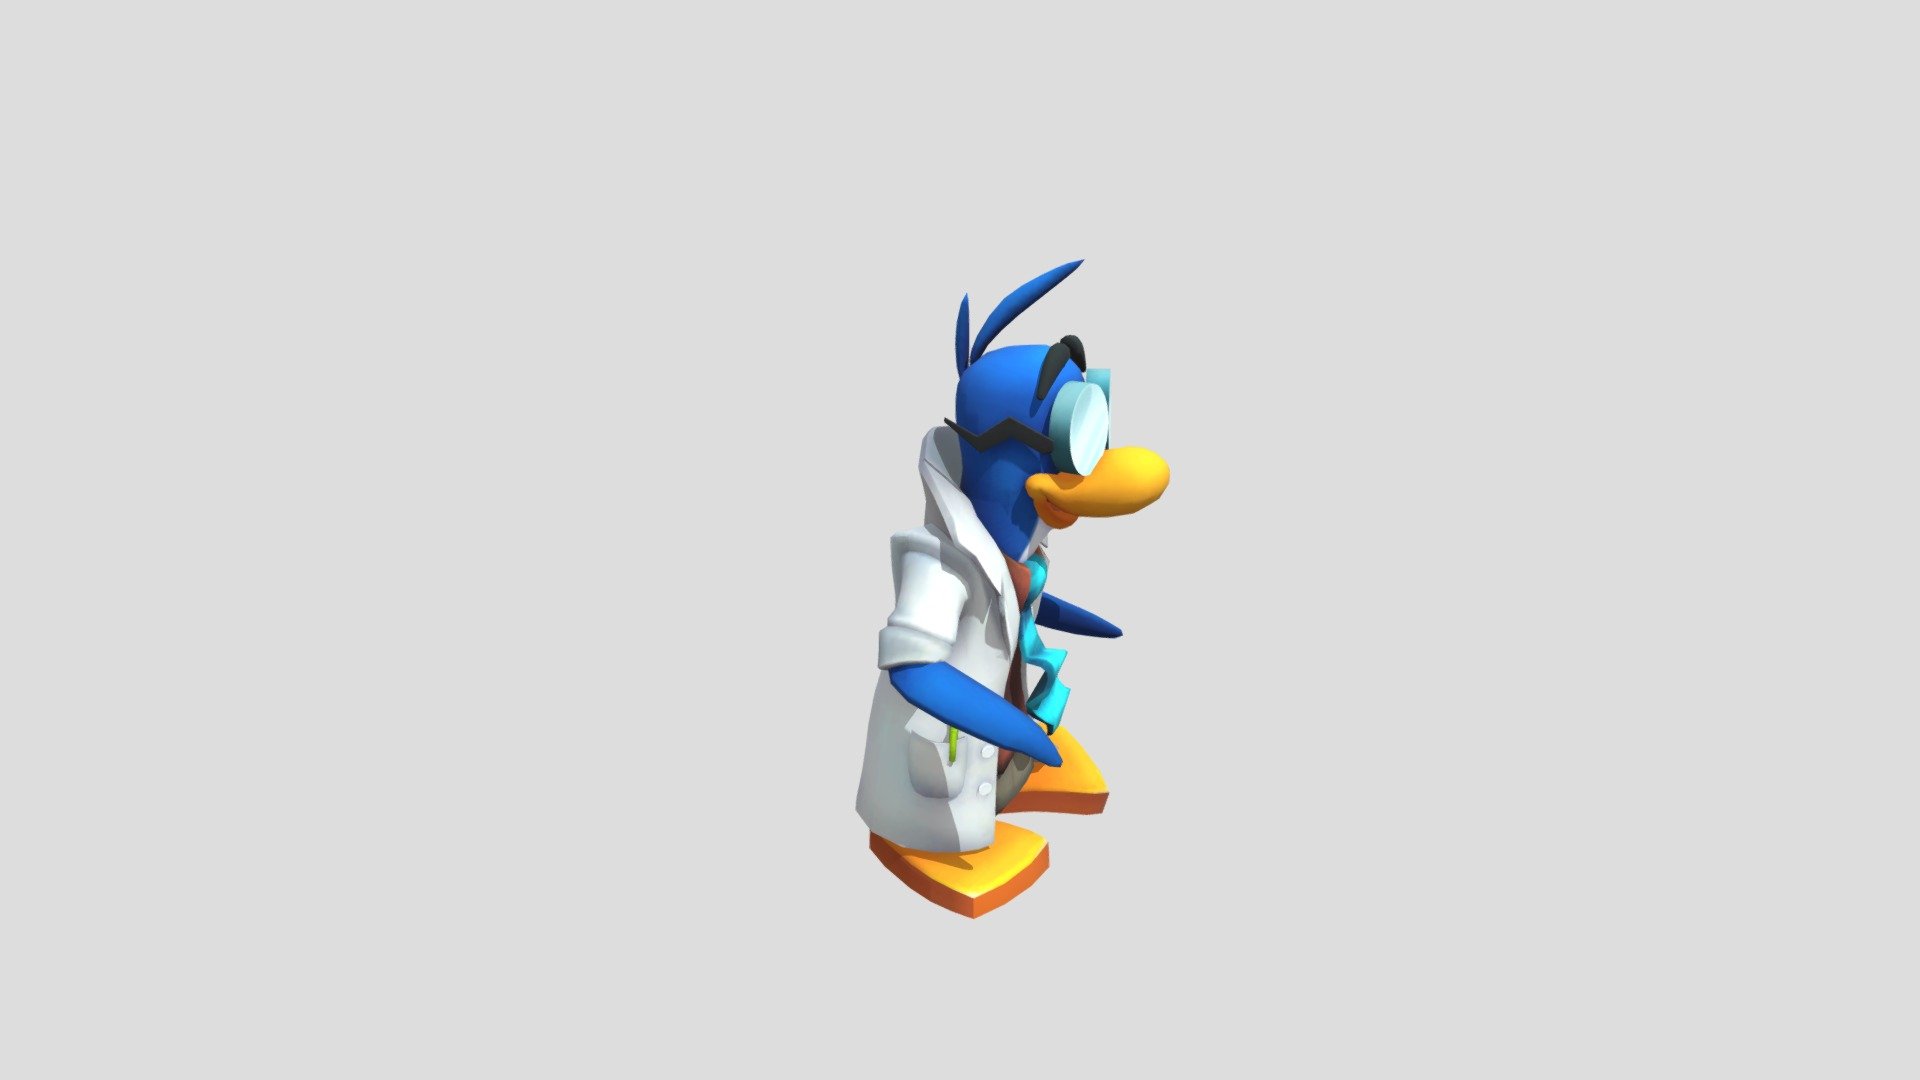 Yall like club penguin - PC Computer - Club Penguin Island - Gary (1) - 3D model by SCUDWORTH 3d model